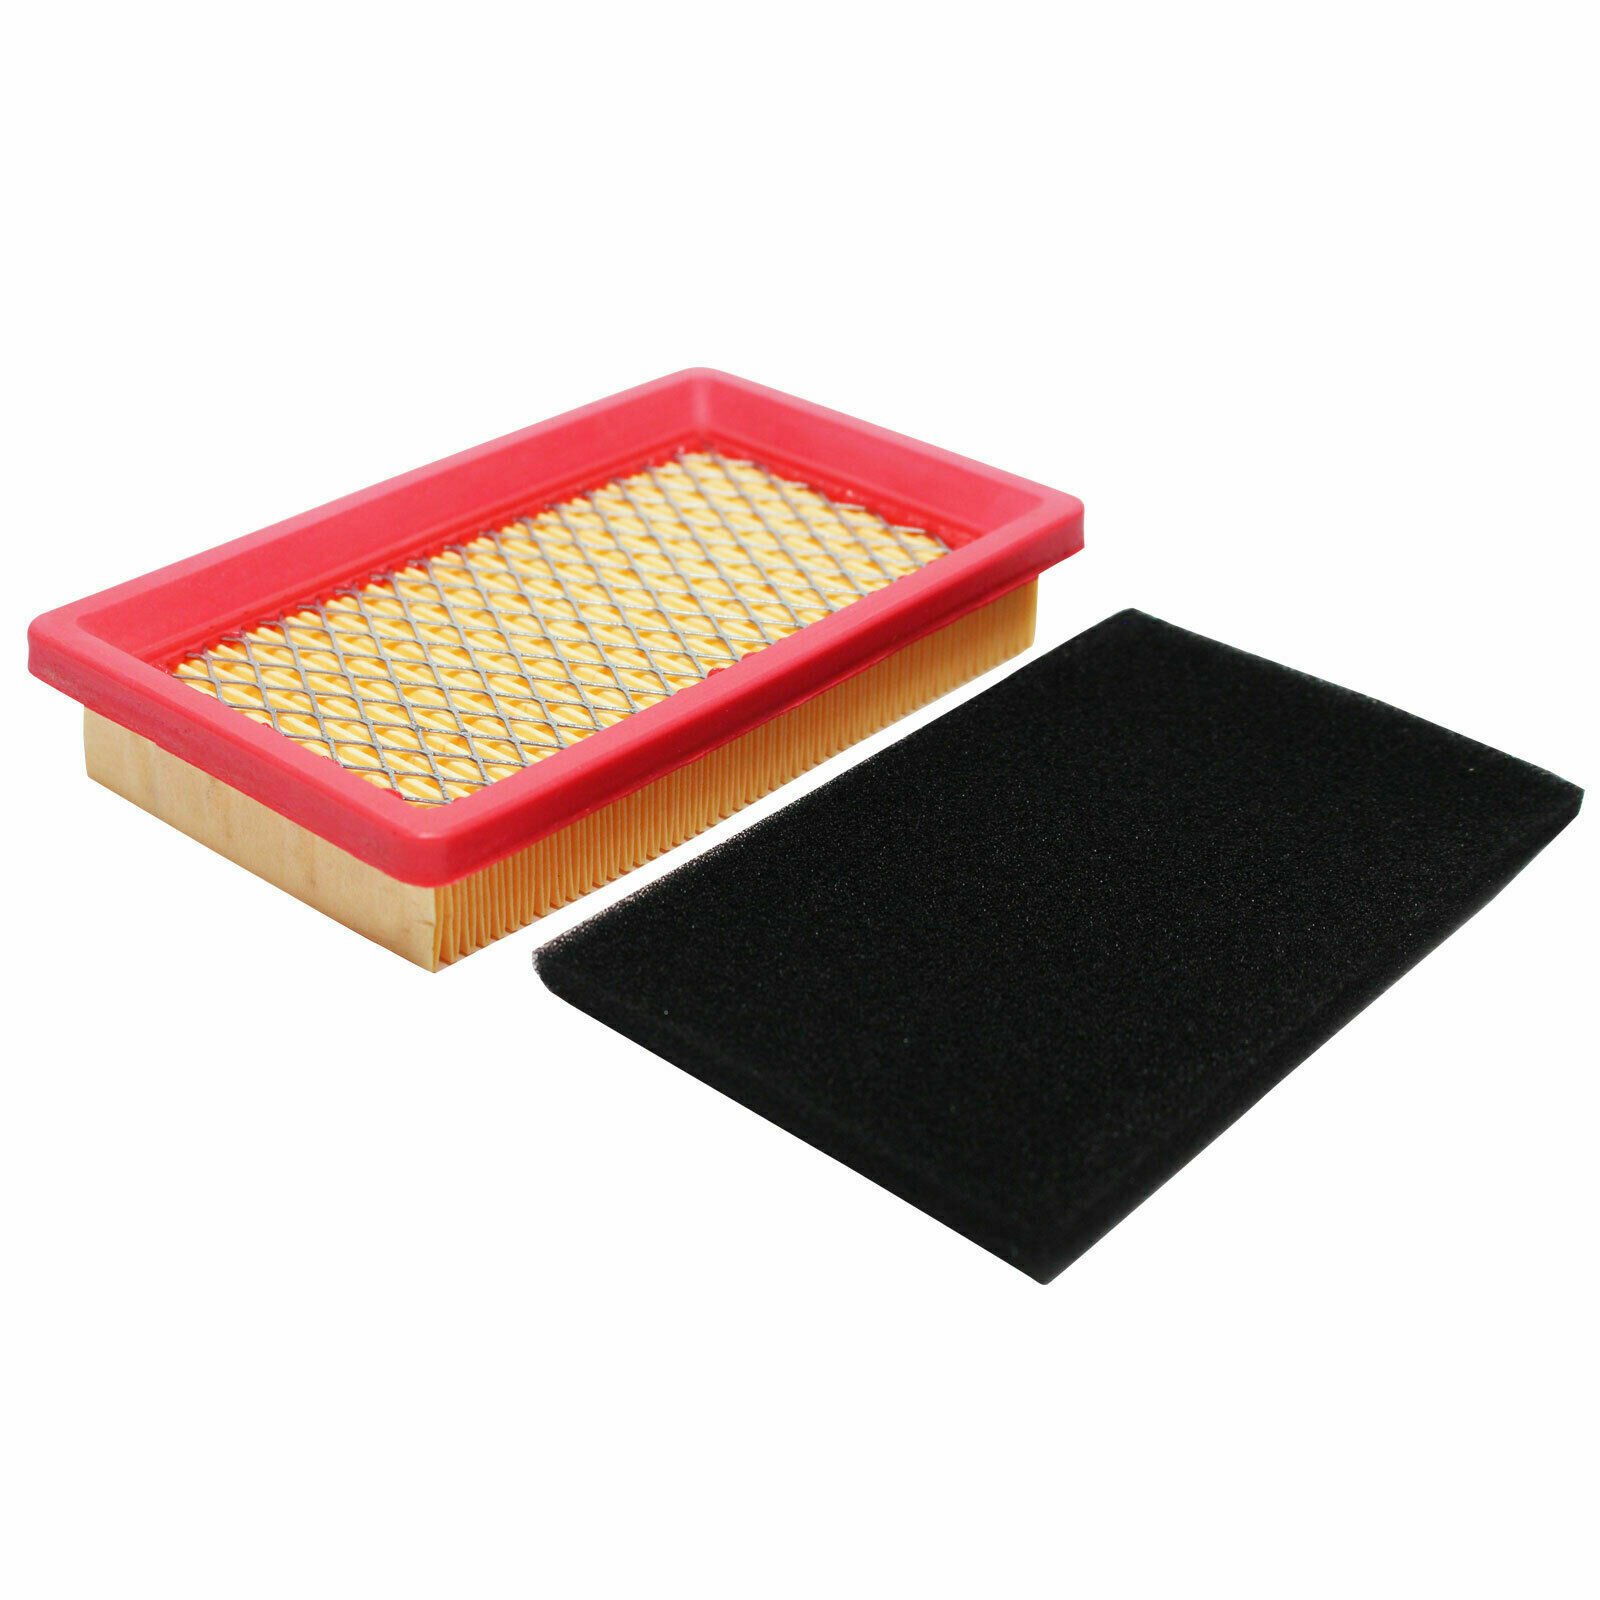 Replaces Air Filter For Remington RM1159 159cc Trimmer